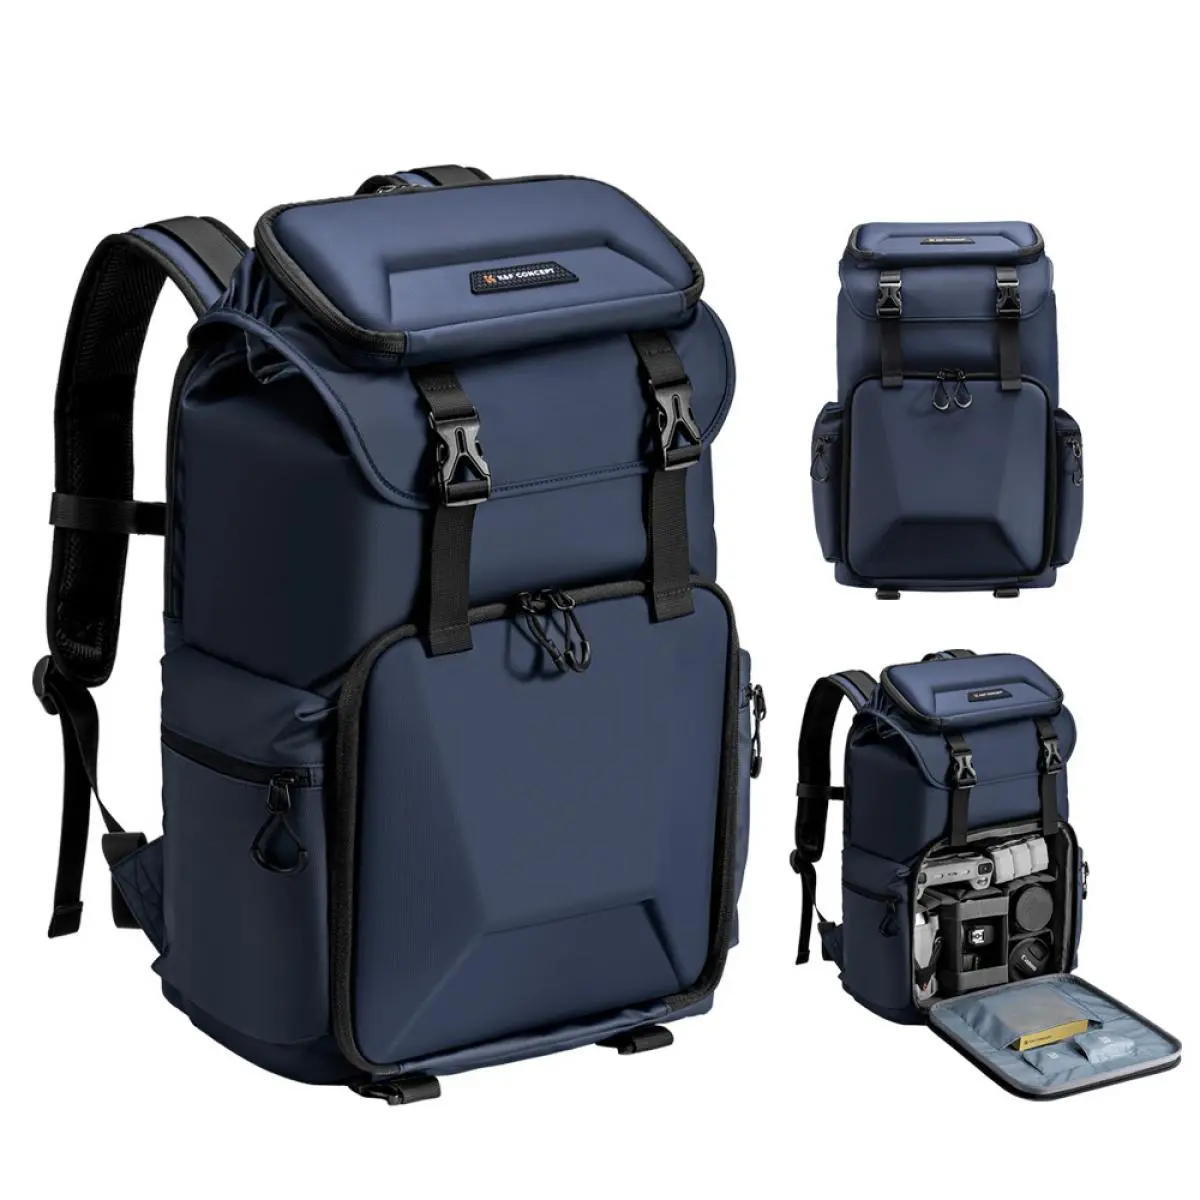 Sony Alpha DSLR Camera Backpack with 15